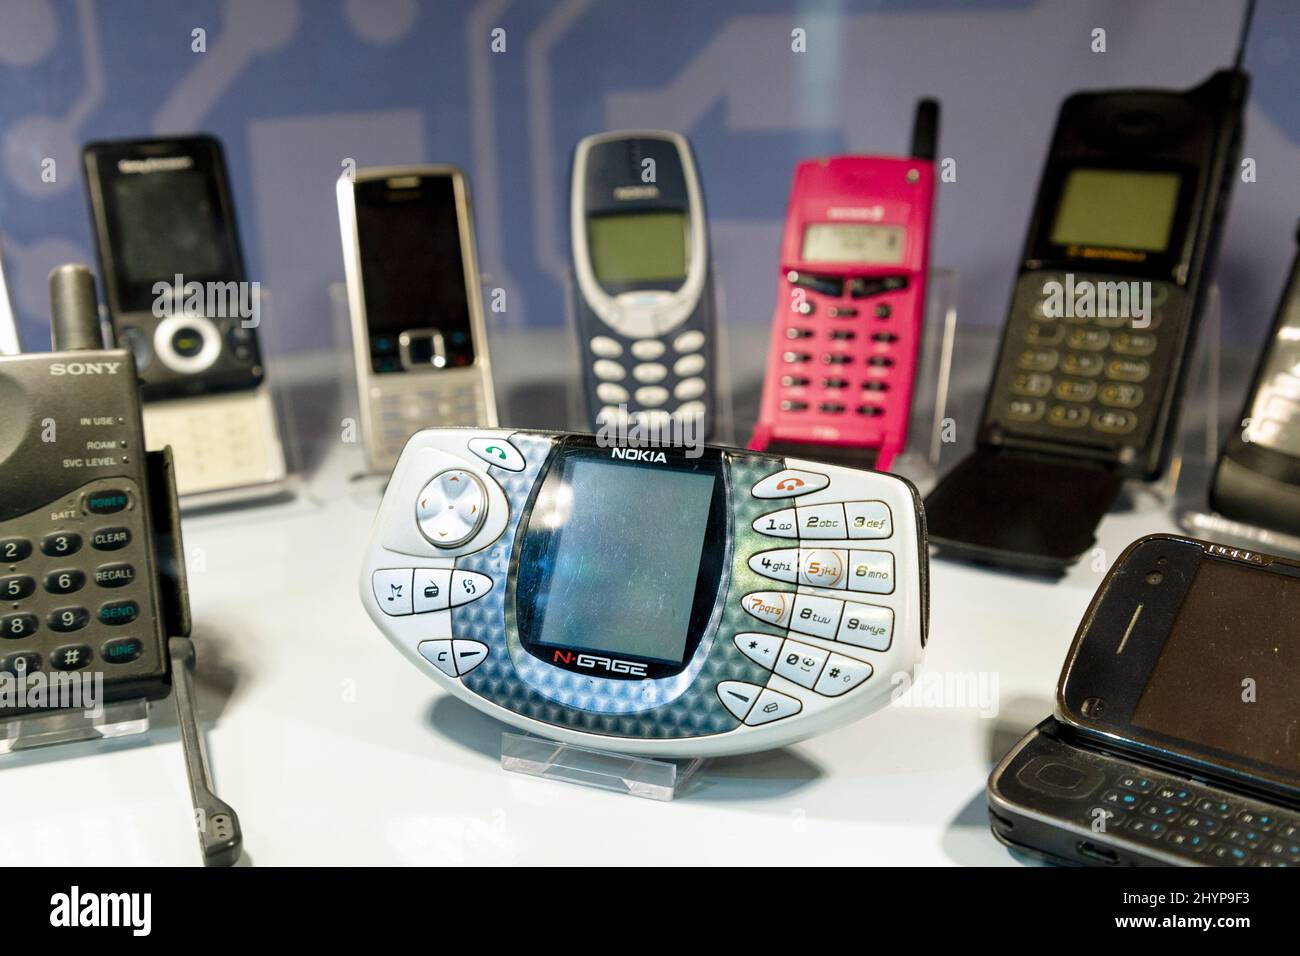 Retro mobile phones on display at Centre for Computing History, Cambridge, UK Stock Photo